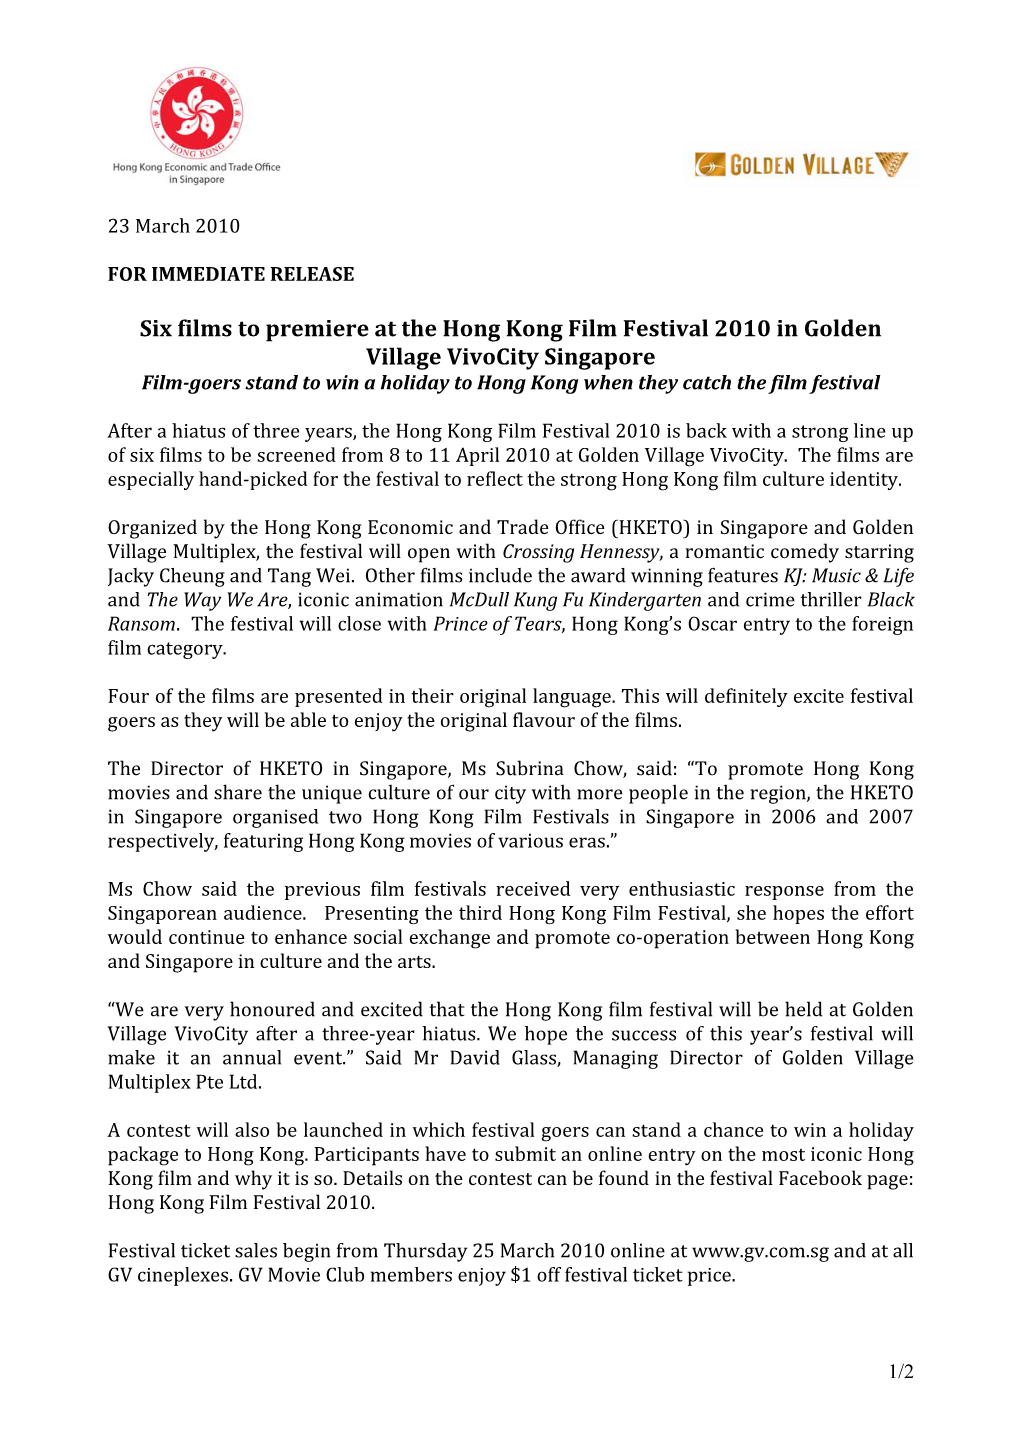 Six Films to Premiere at the Hong Kong Film Festival 2010 in Golden